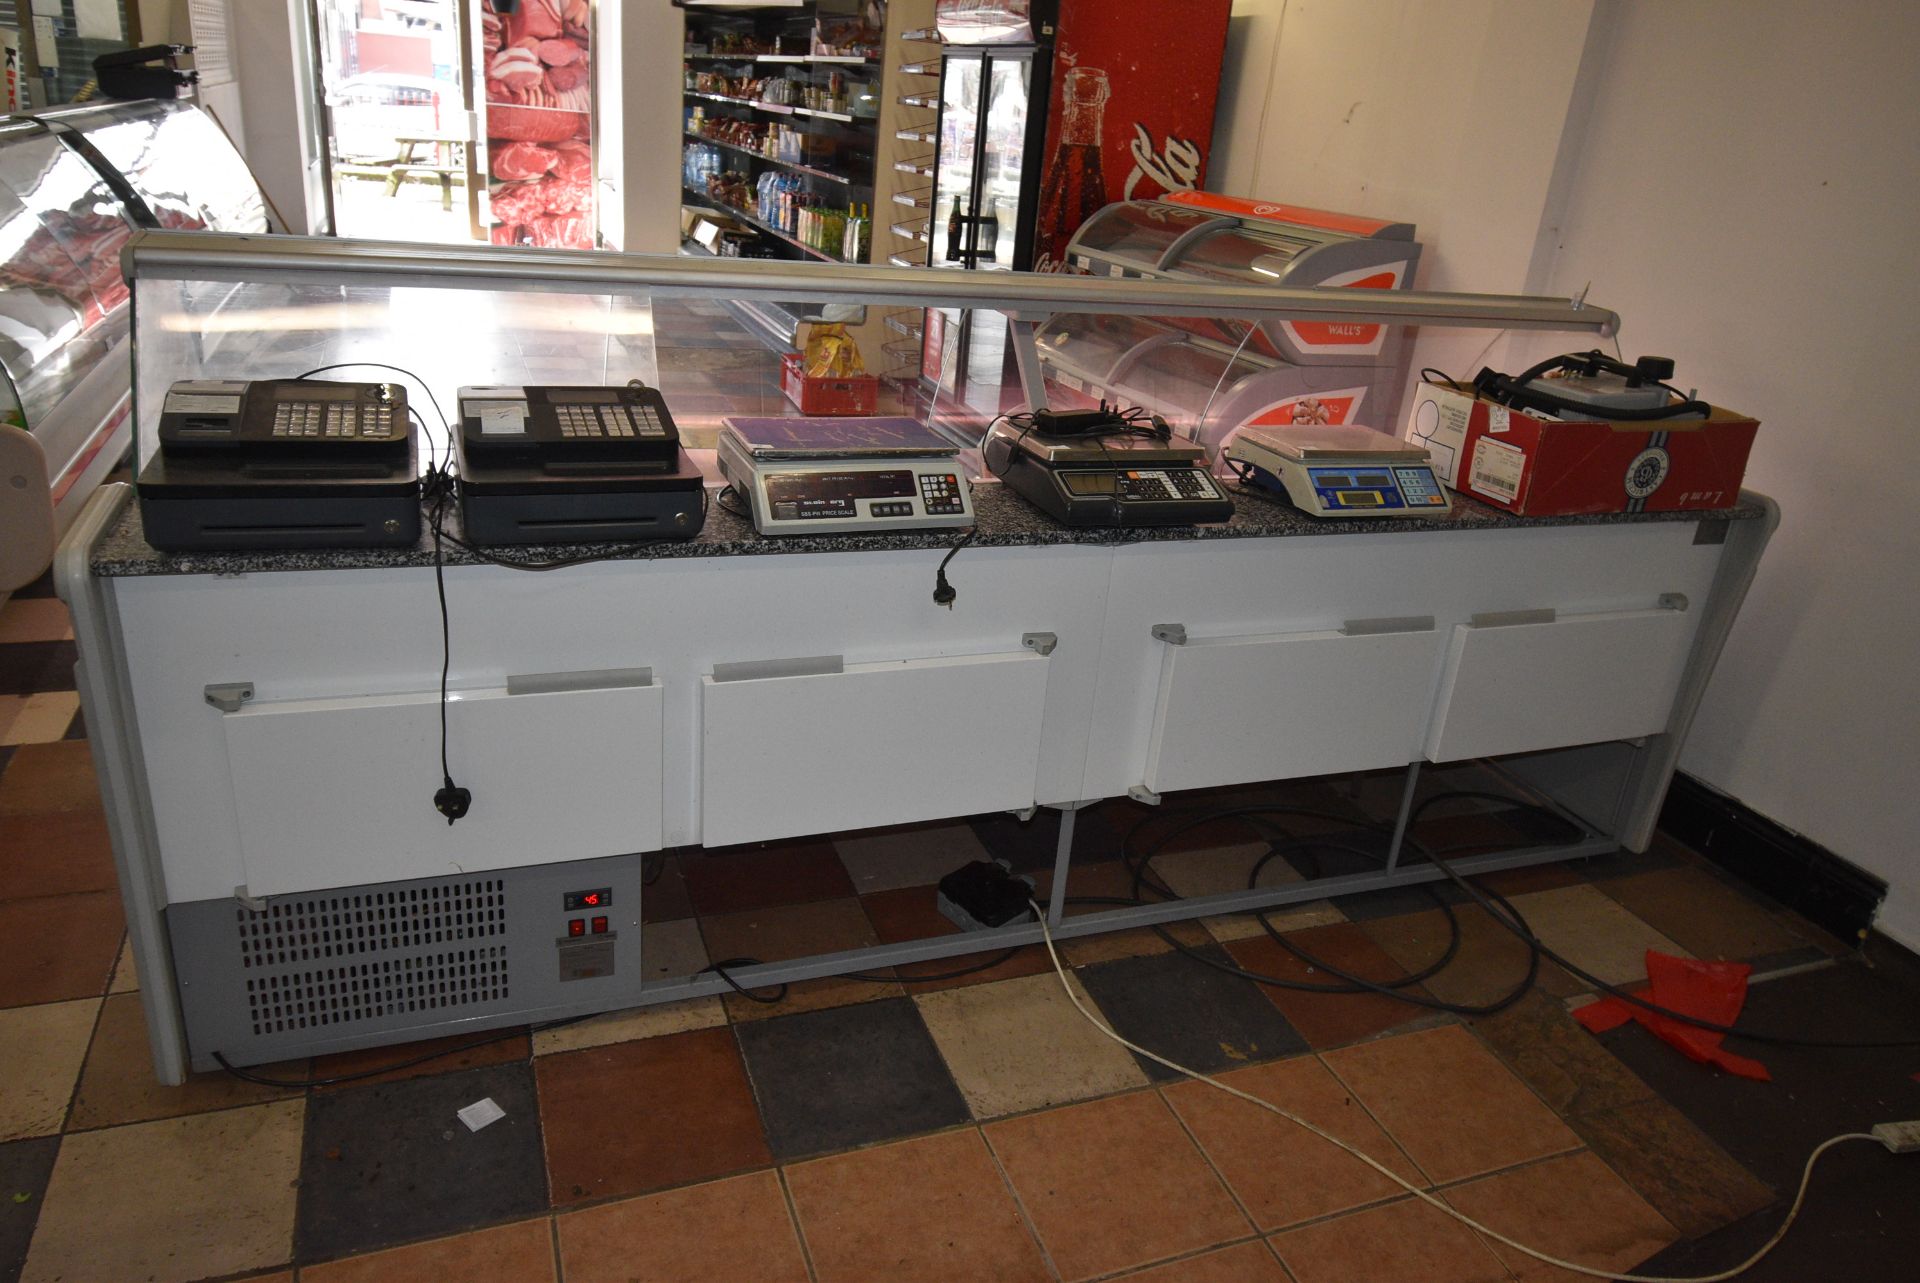 Cebea by Bochnia Server Over Refrigerated Display Counter with Four Refrigerated Storage Lockers - Image 2 of 2